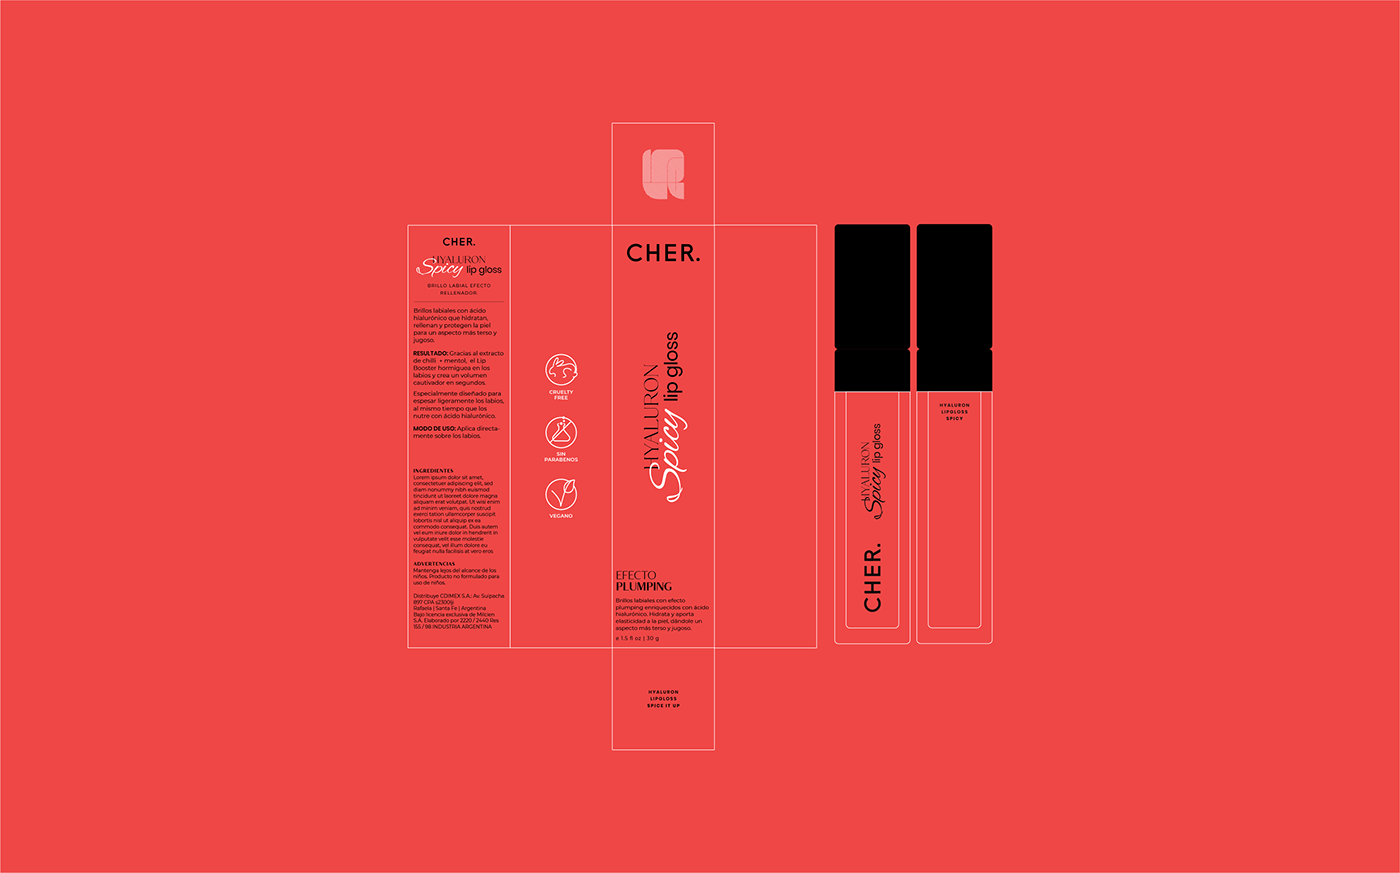 Packaging dielines and layout design for box and label
